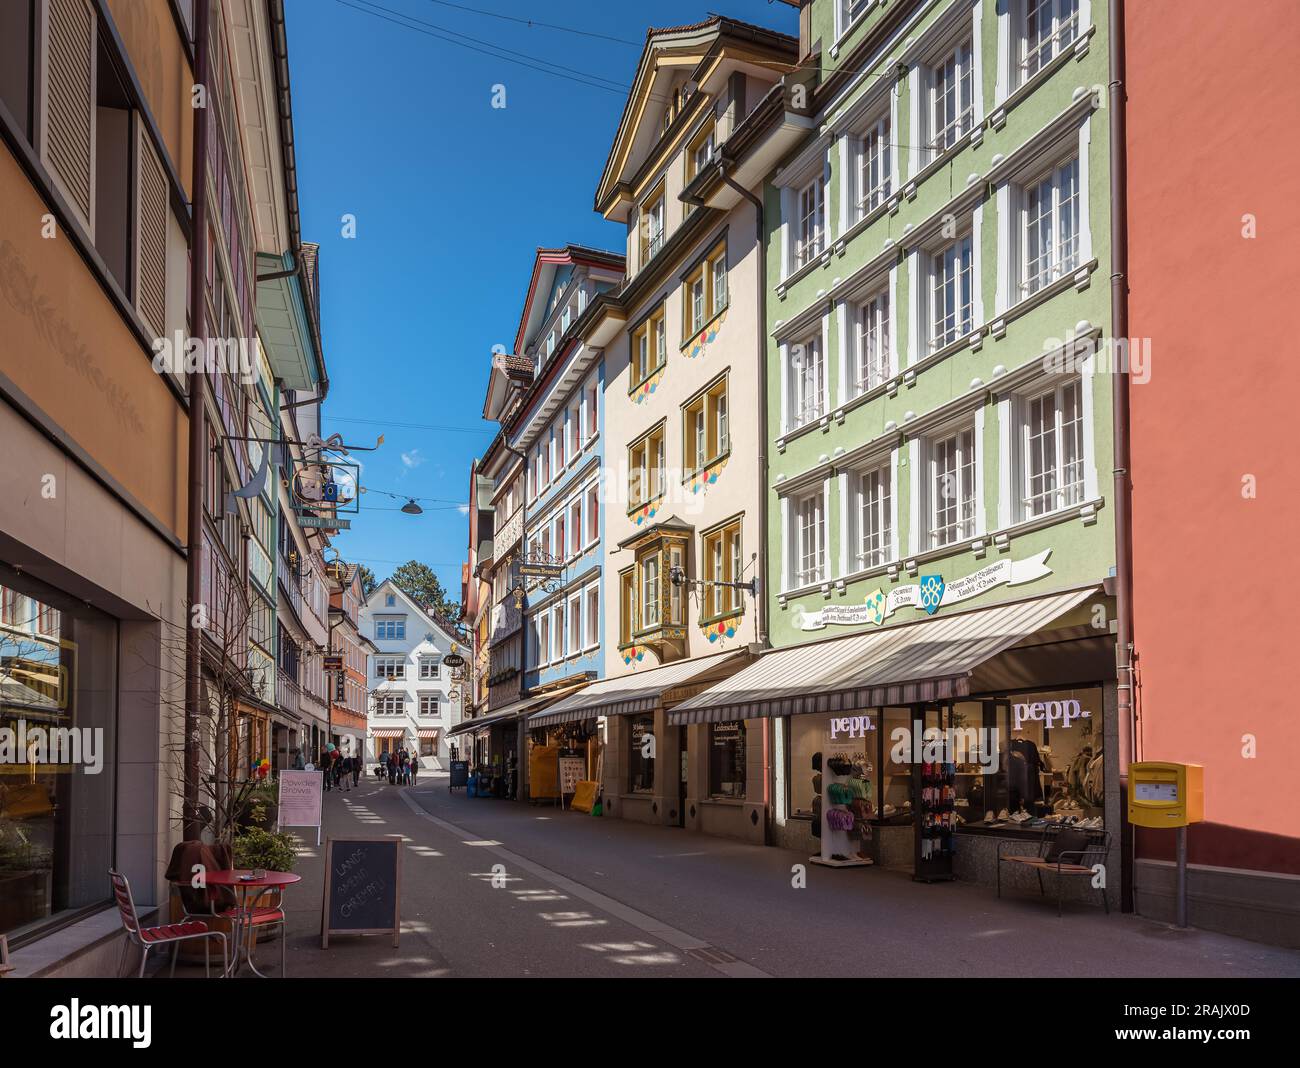 Typical Appenzell houses in the main street of Appenzell, Canton Appenzell Innerrhoden, Switzerland Stock Photo